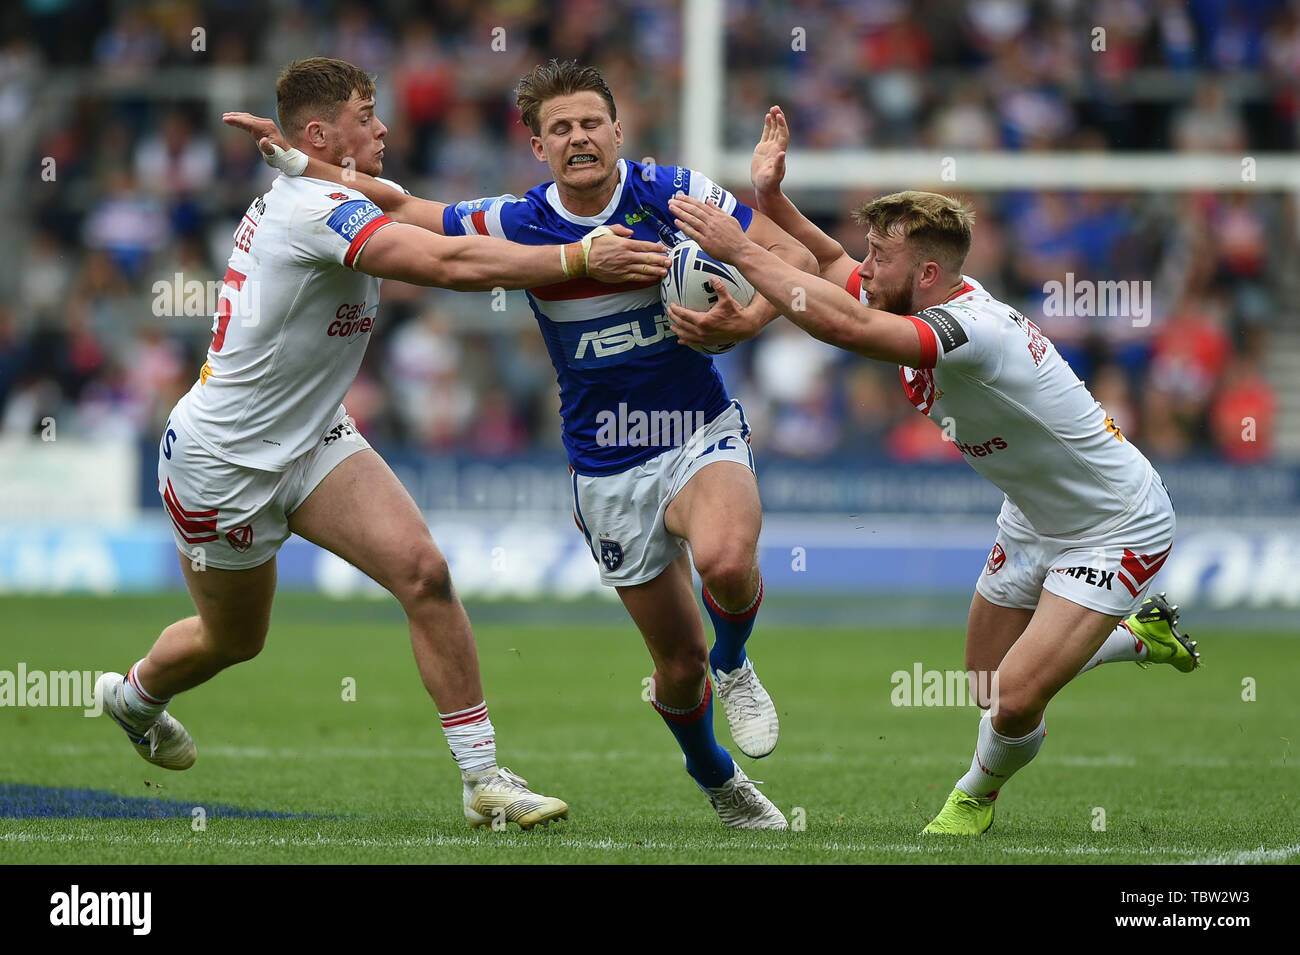 St. Helens, UK, 1 6 2019. 01 June 2019. Totally Wicked Stadium, St. Helens, England; Rugby League Coral Challenge Cup, St. Helens vs Wakefield Trinity;  Wakefield Trinity Captain Jacob Miller finds no way through Saint Helens Morgan Knowles and Danny Richardson.  Dean Williams/RugbyPixUK Stock Photo